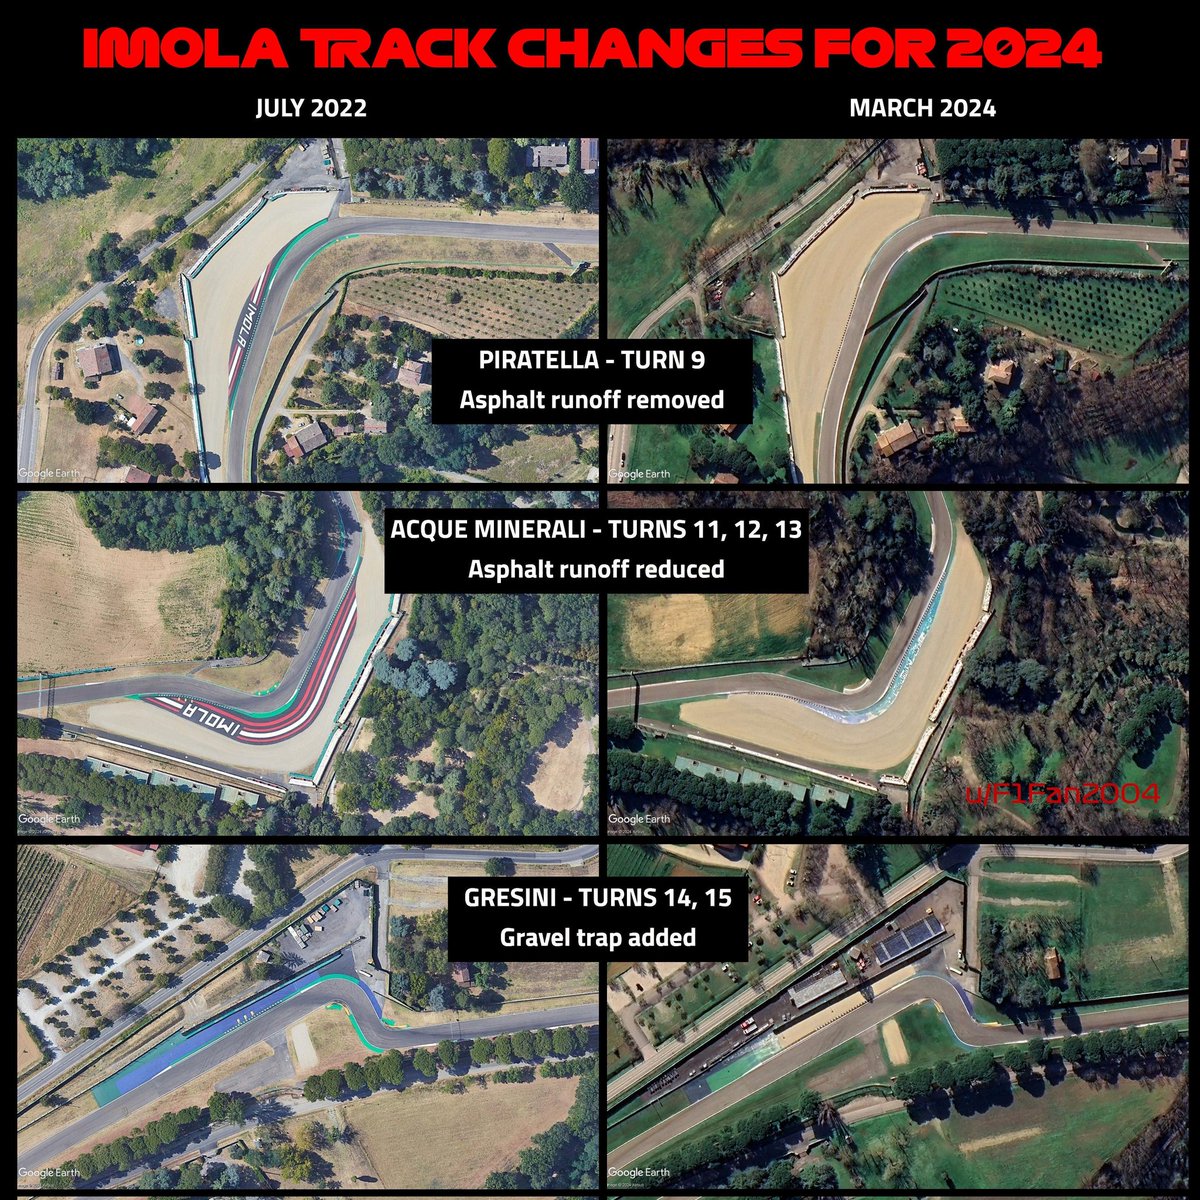 Imola will have more gravel runoffs, replacing the asphalt ones.
Imola W